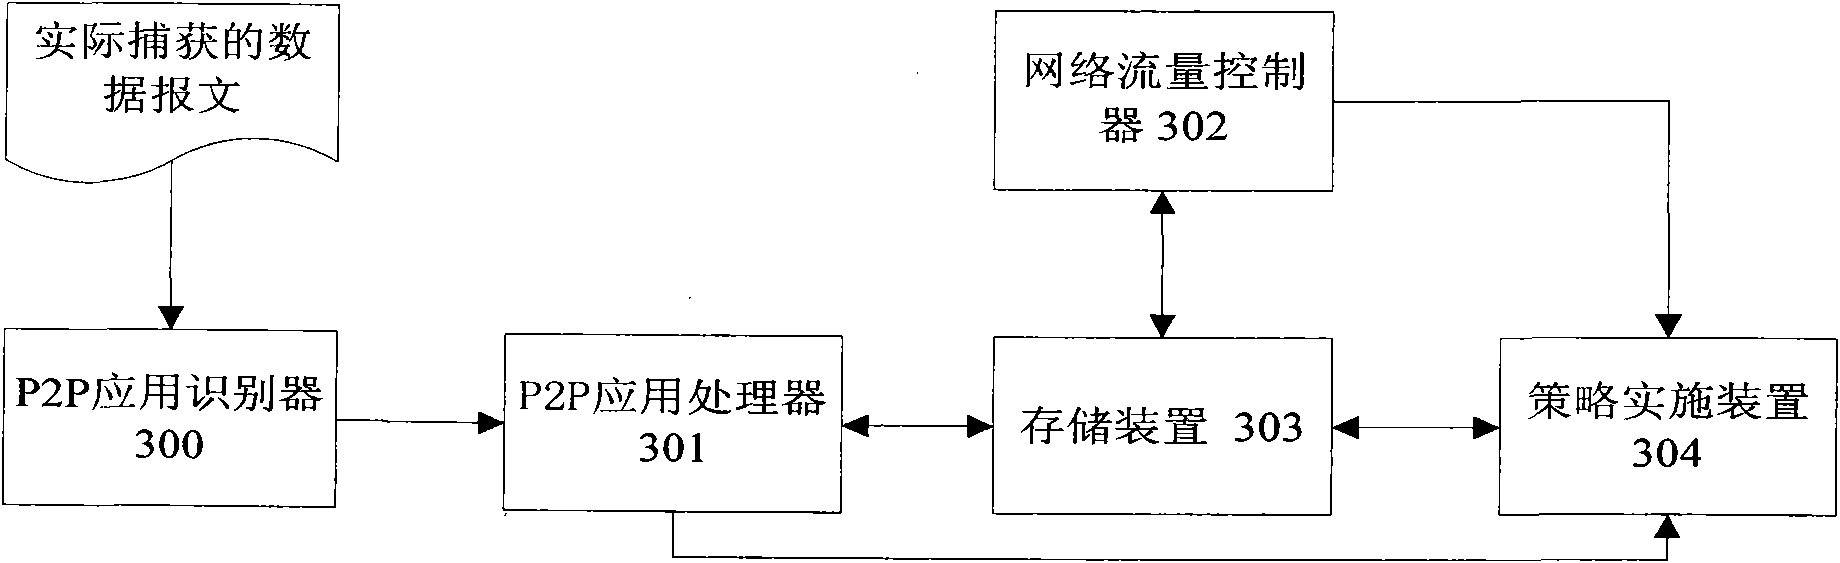 Method and system for automatically controlling flow of peer-to-peer networking service